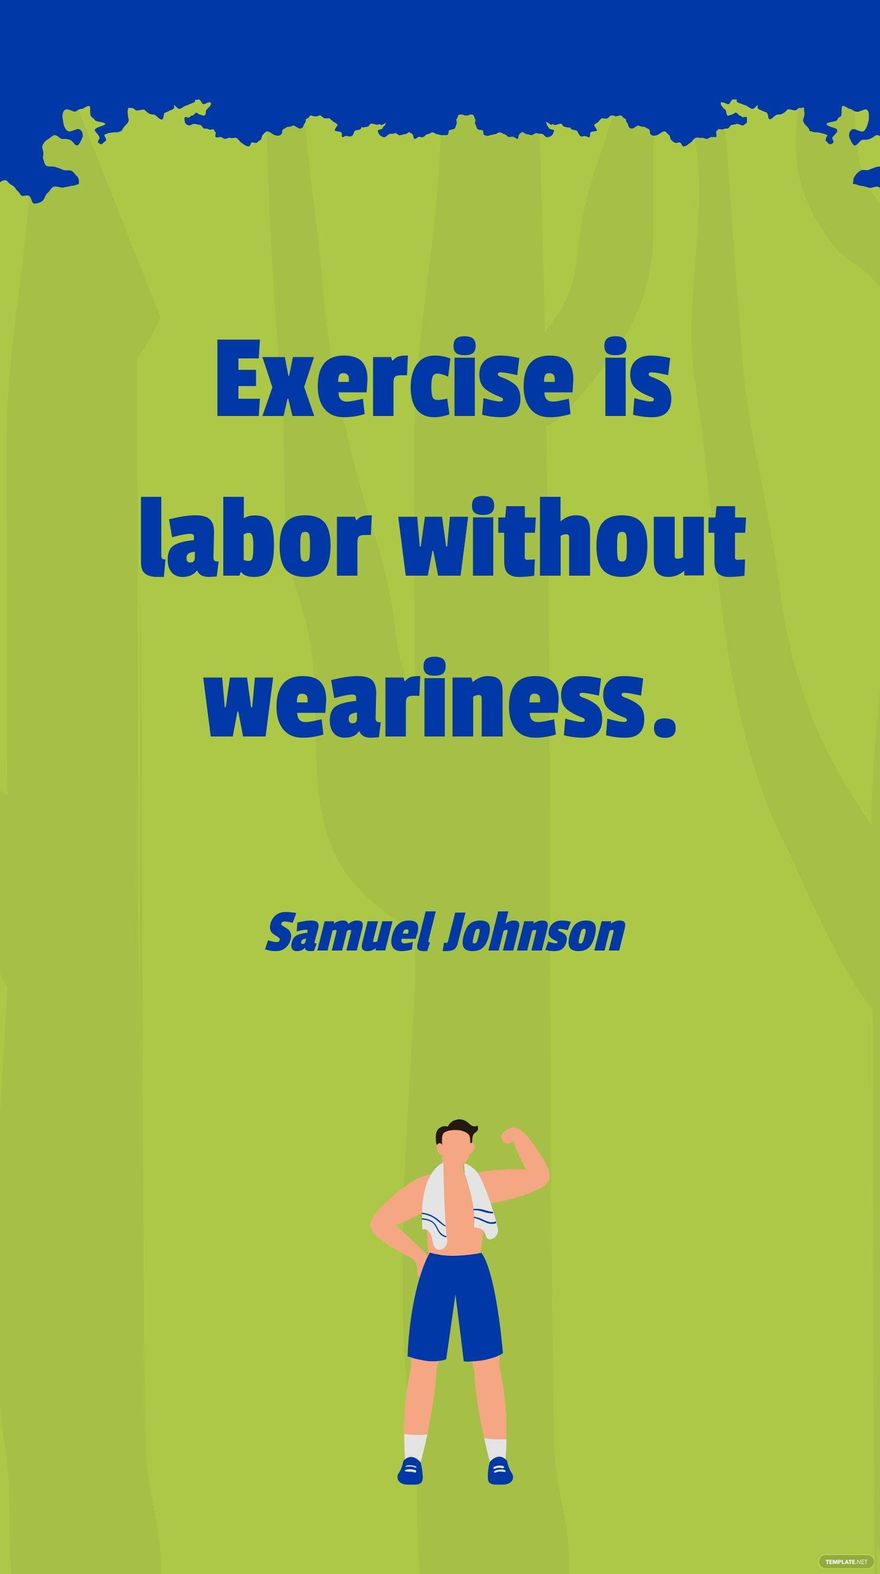 Samuel Johnson - Exercise is labor without weariness. in JPG